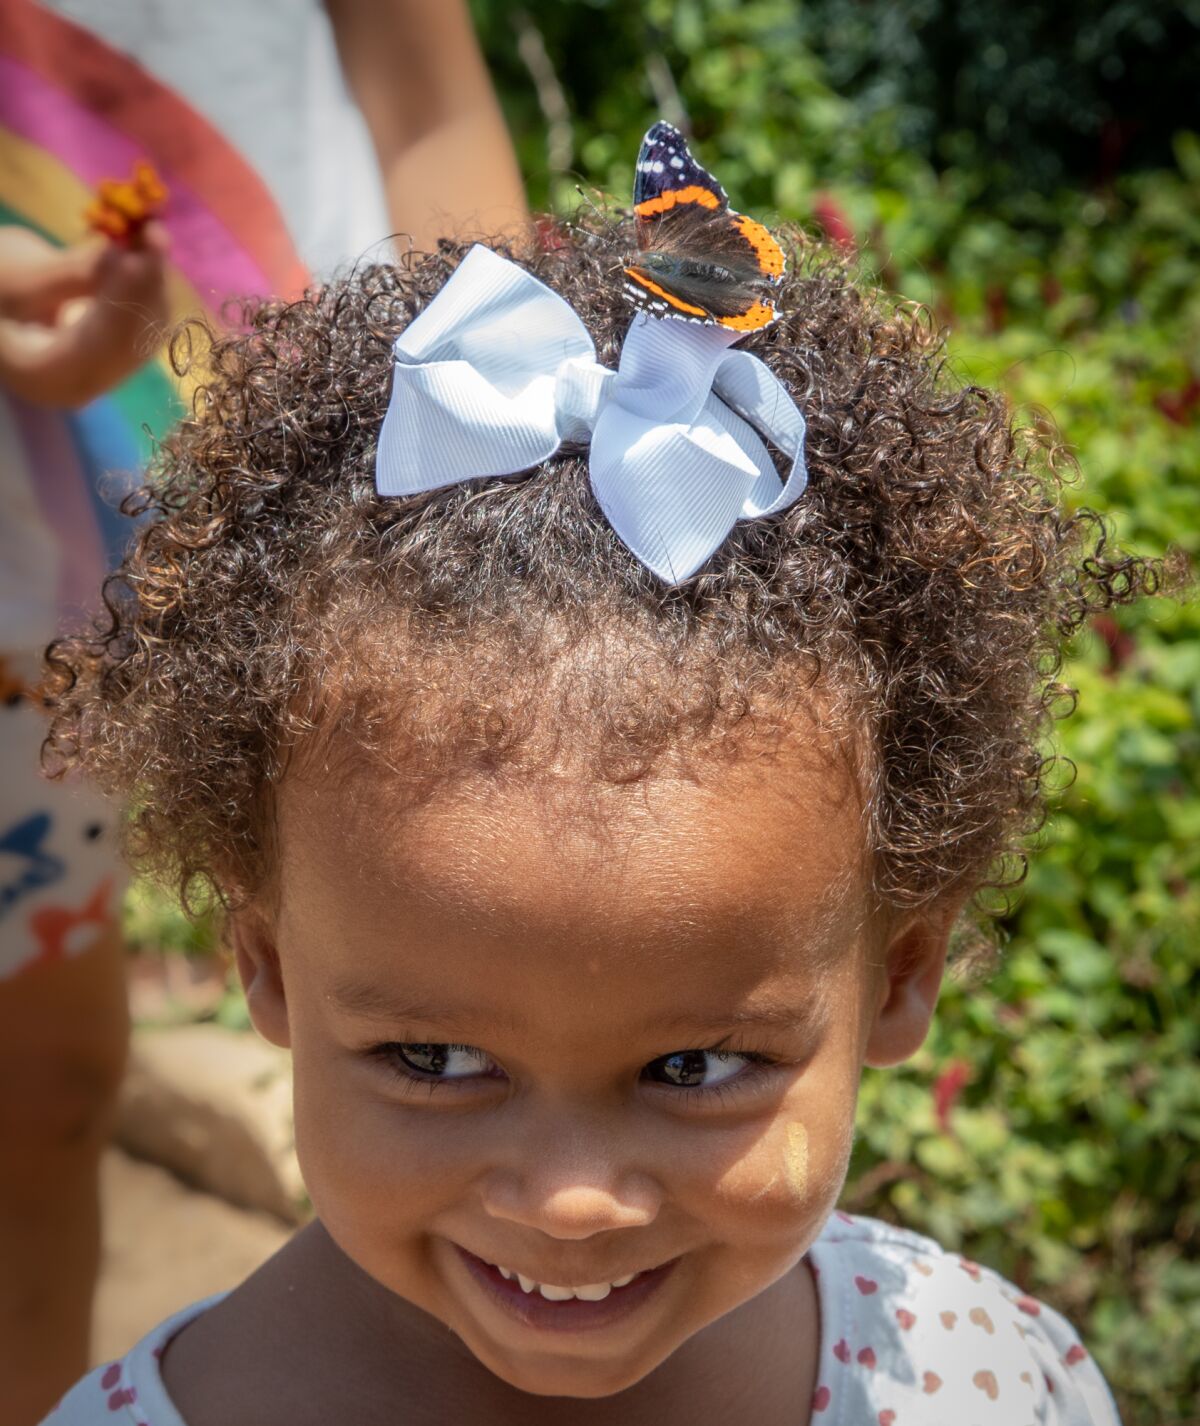 Natasha Rivera, 2, of Oceanside smiles as a red admiral butterfly takes a rest on her hair bow.